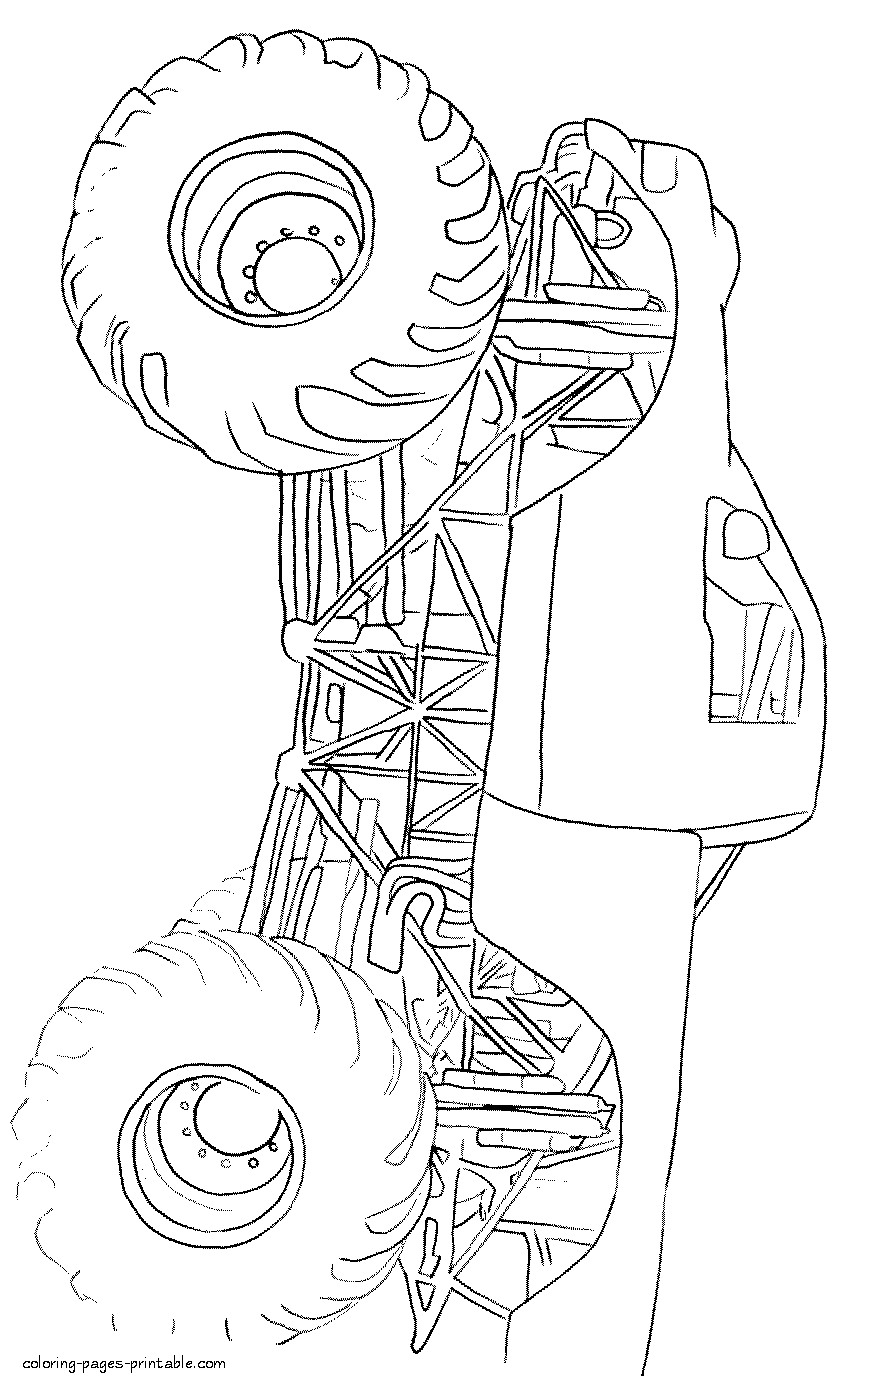 Coloring pages cars. A monster truck || COLORING-PAGES-PRINTABLE.COM